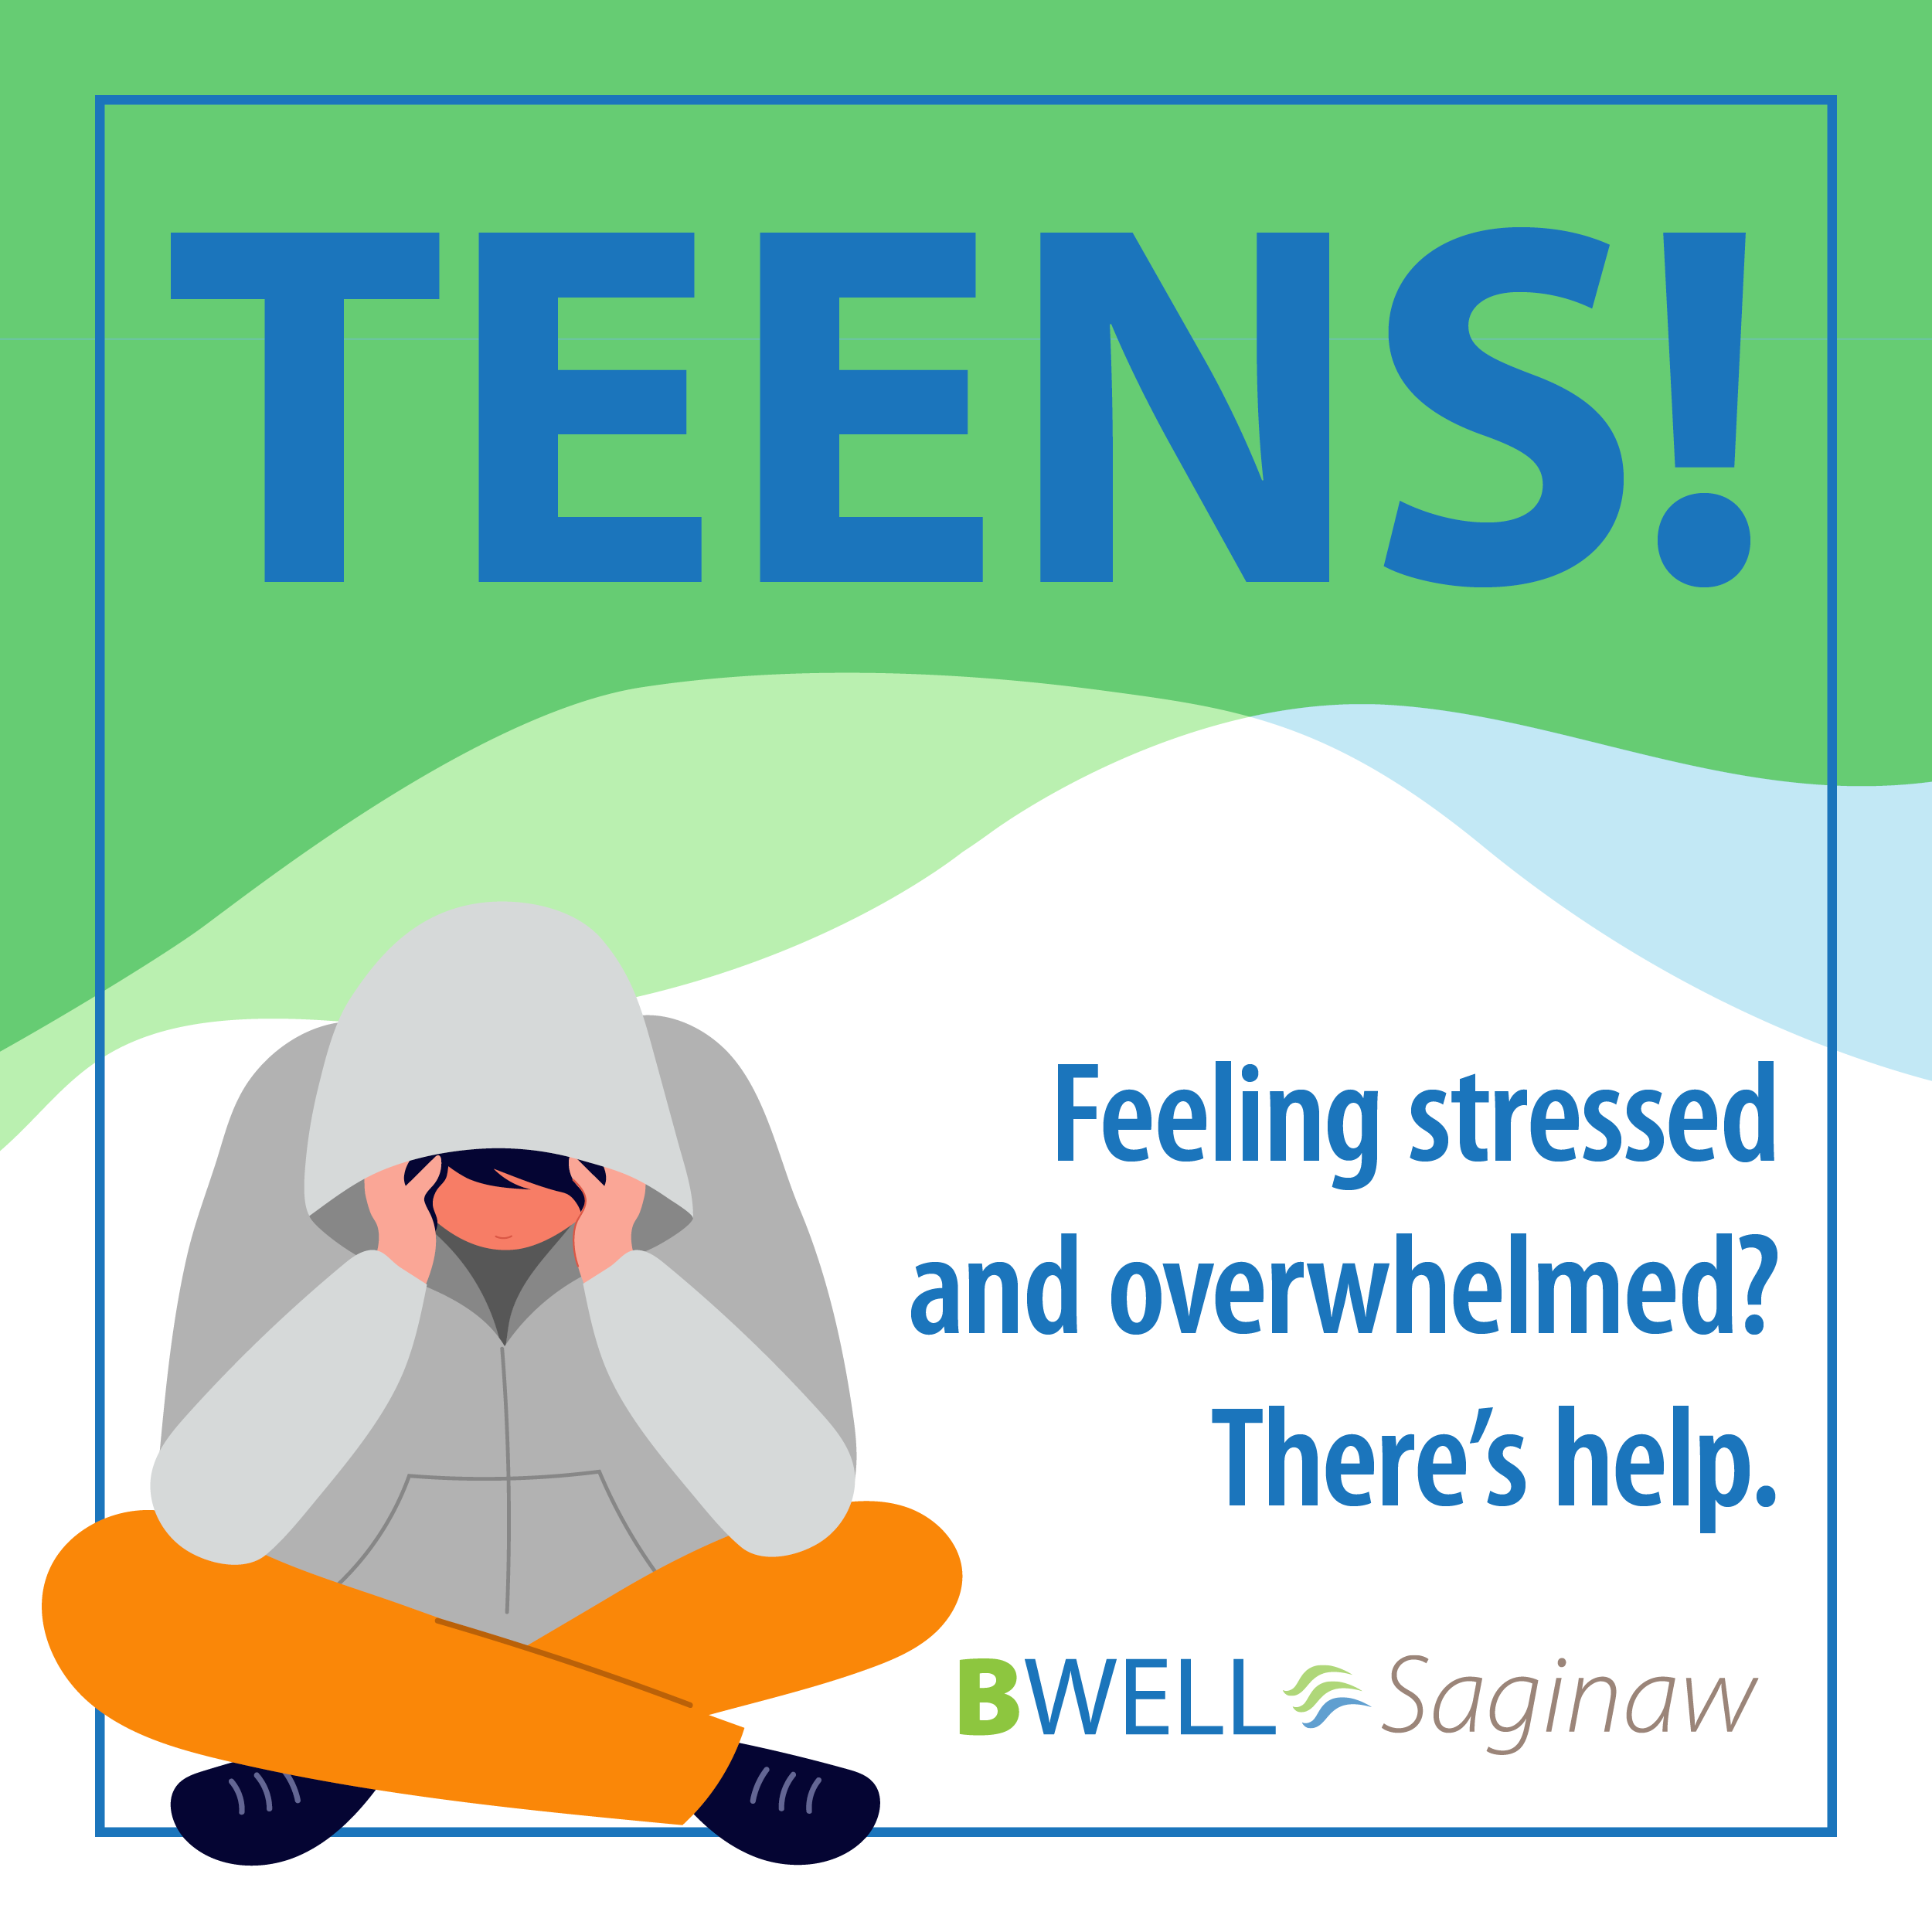 Teens! Feeling Stressed and overwhelmed? There's help.